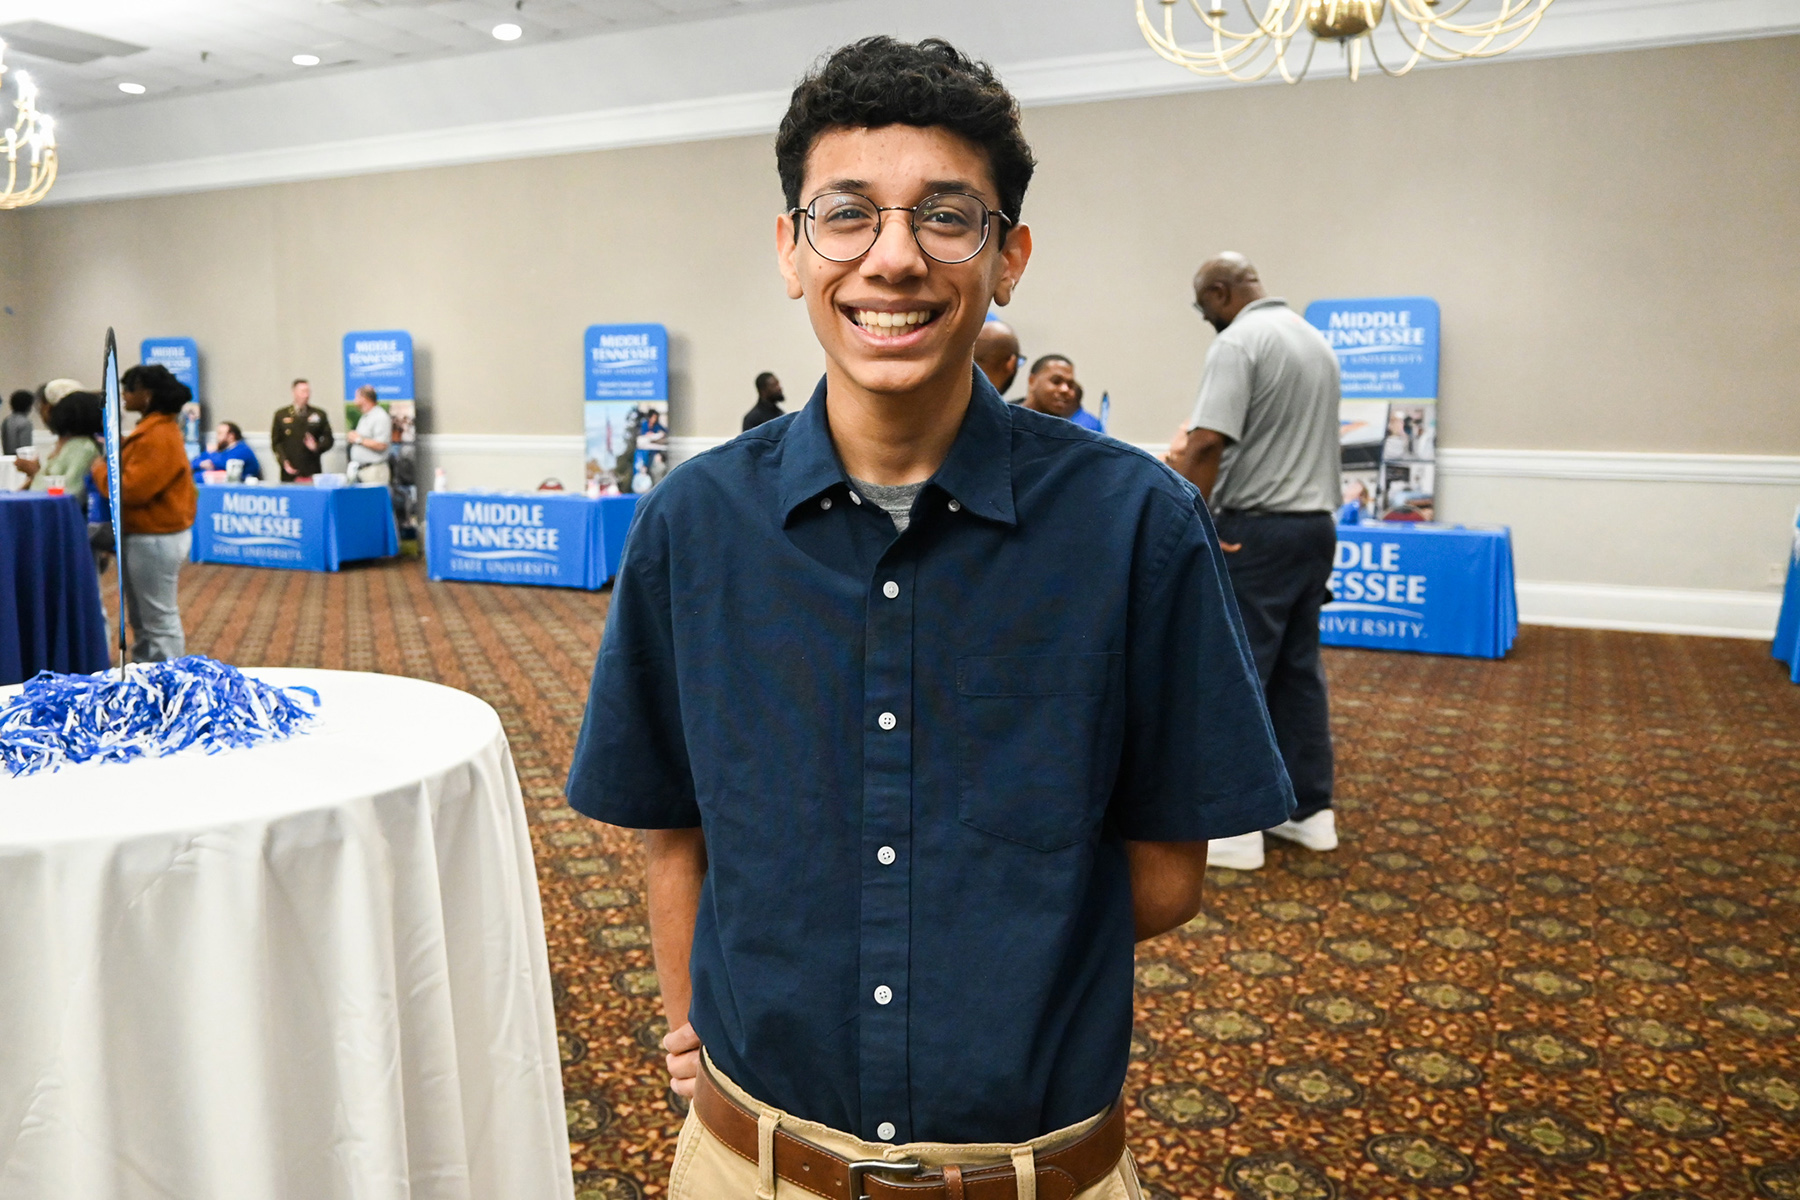 Prospective Middle Tennessee State University student Jai Mehta learned more about the university’s science programs and facilities at the True Blue Tour event at the Millennium Maxwell House in Nashville, Tenn., on Wednesday, Oct. 5, 2022. (MTSU photo by Stephanie Wagner)